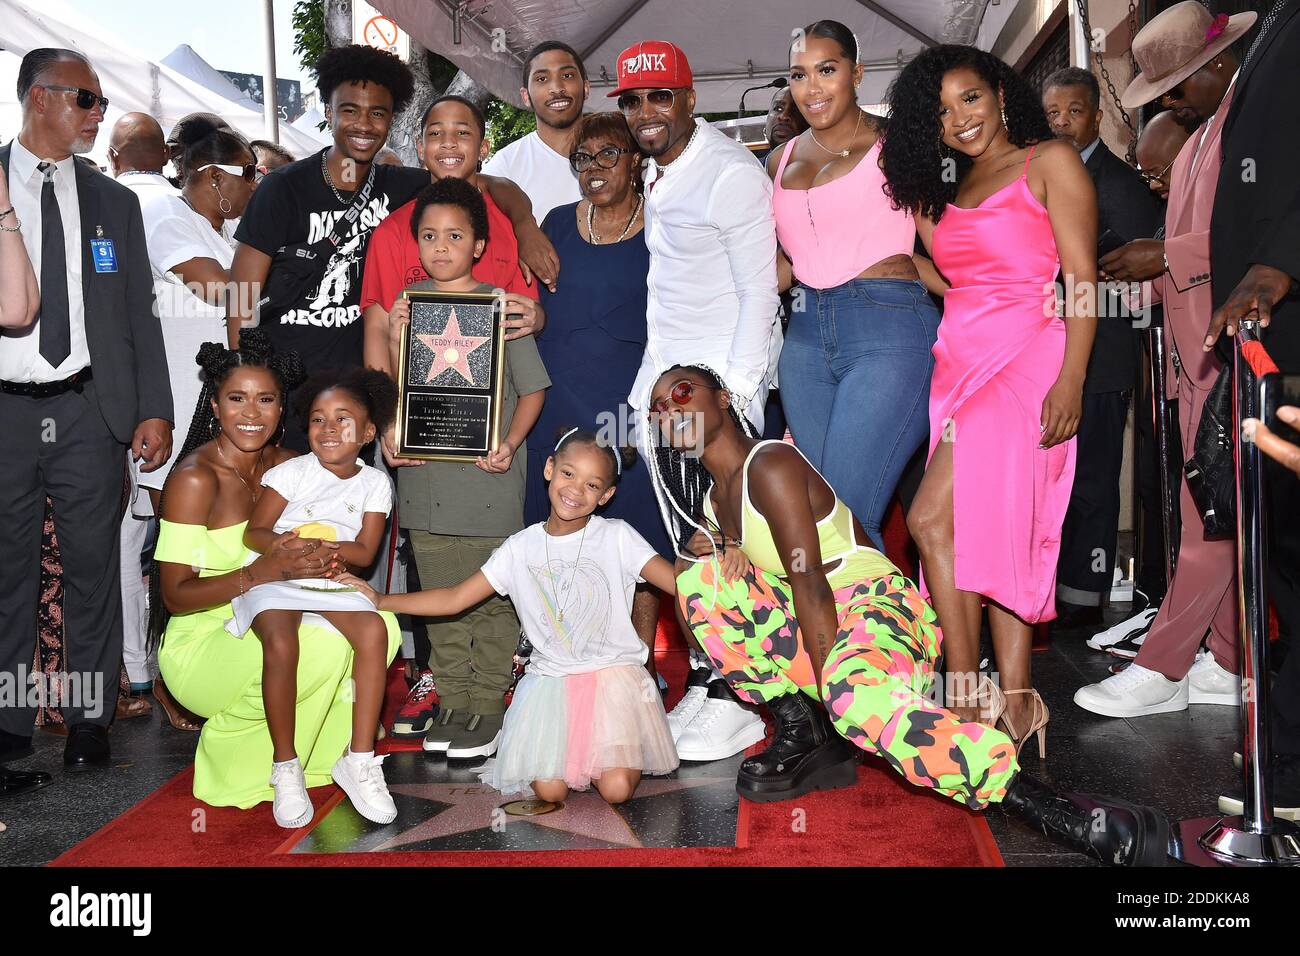 Teddy Riley's family and friends attend the ceremony honoring Teddy Riley with a star on the Hollywood Walk of Fame on August 16, 2019 in Los Angeles, CA, USA. Photo by Lionel Hahn/ABACAPRESS.COM Stock Photo